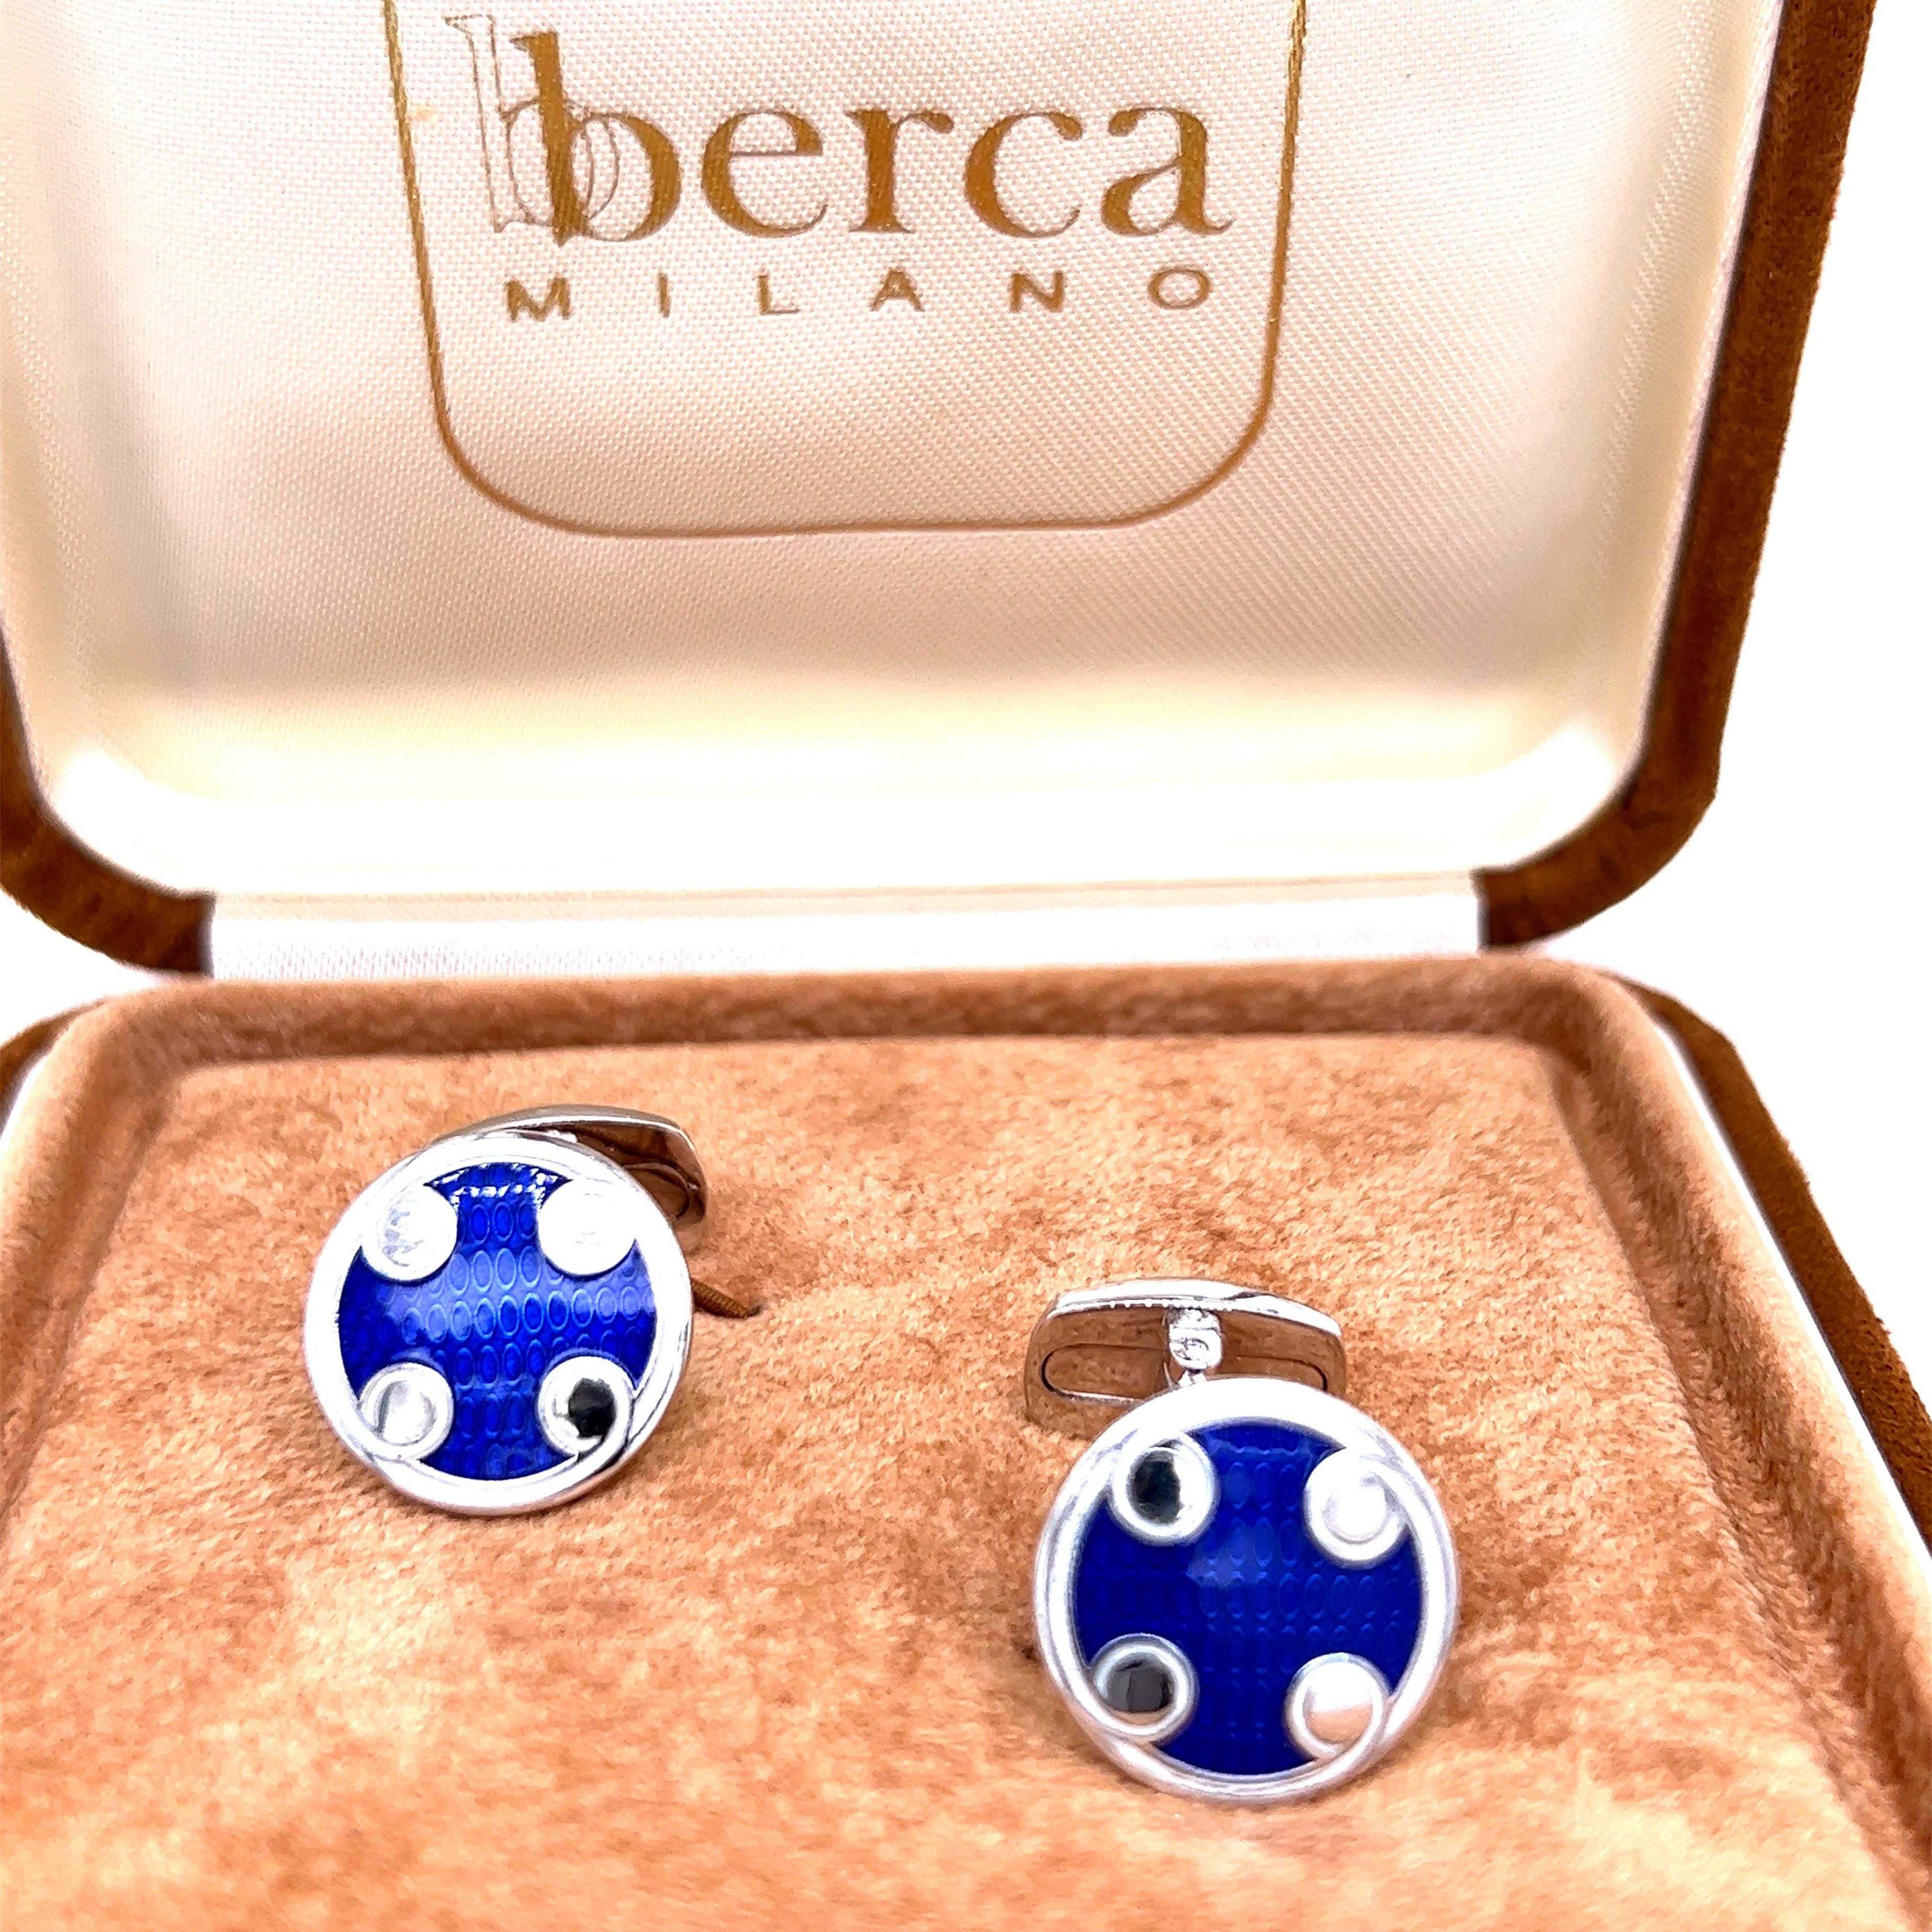 Berca White Navy Blue Round Hand Enameled Sterling Silver Cufflinks In New Condition For Sale In Valenza, IT